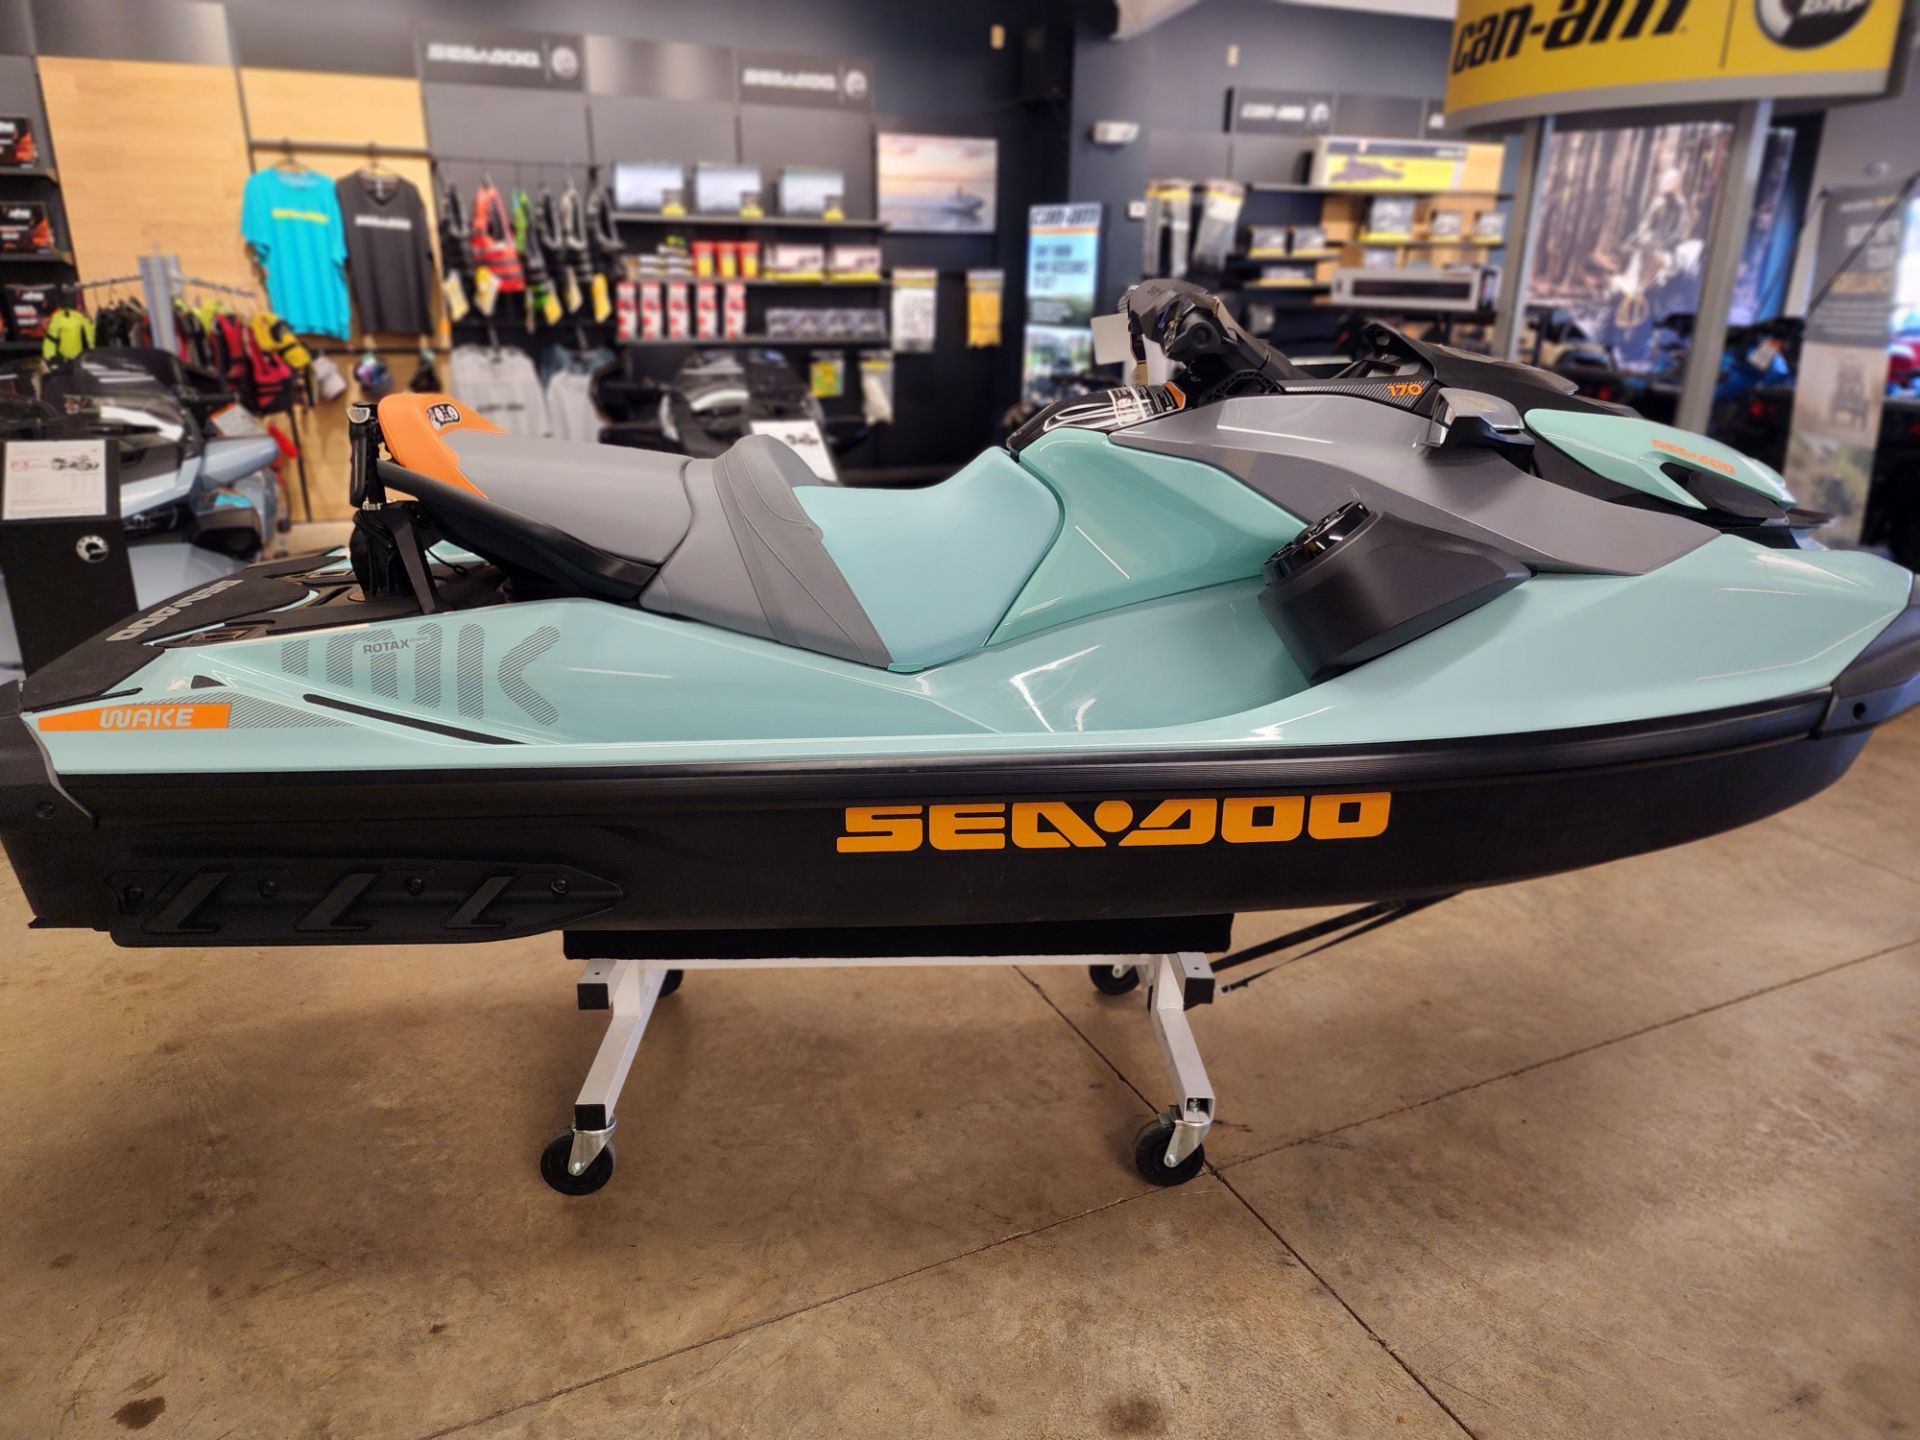 2022 Sea-Doo WAKE 170 iBR + Sound System in Pearl, Mississippi - Photo 1